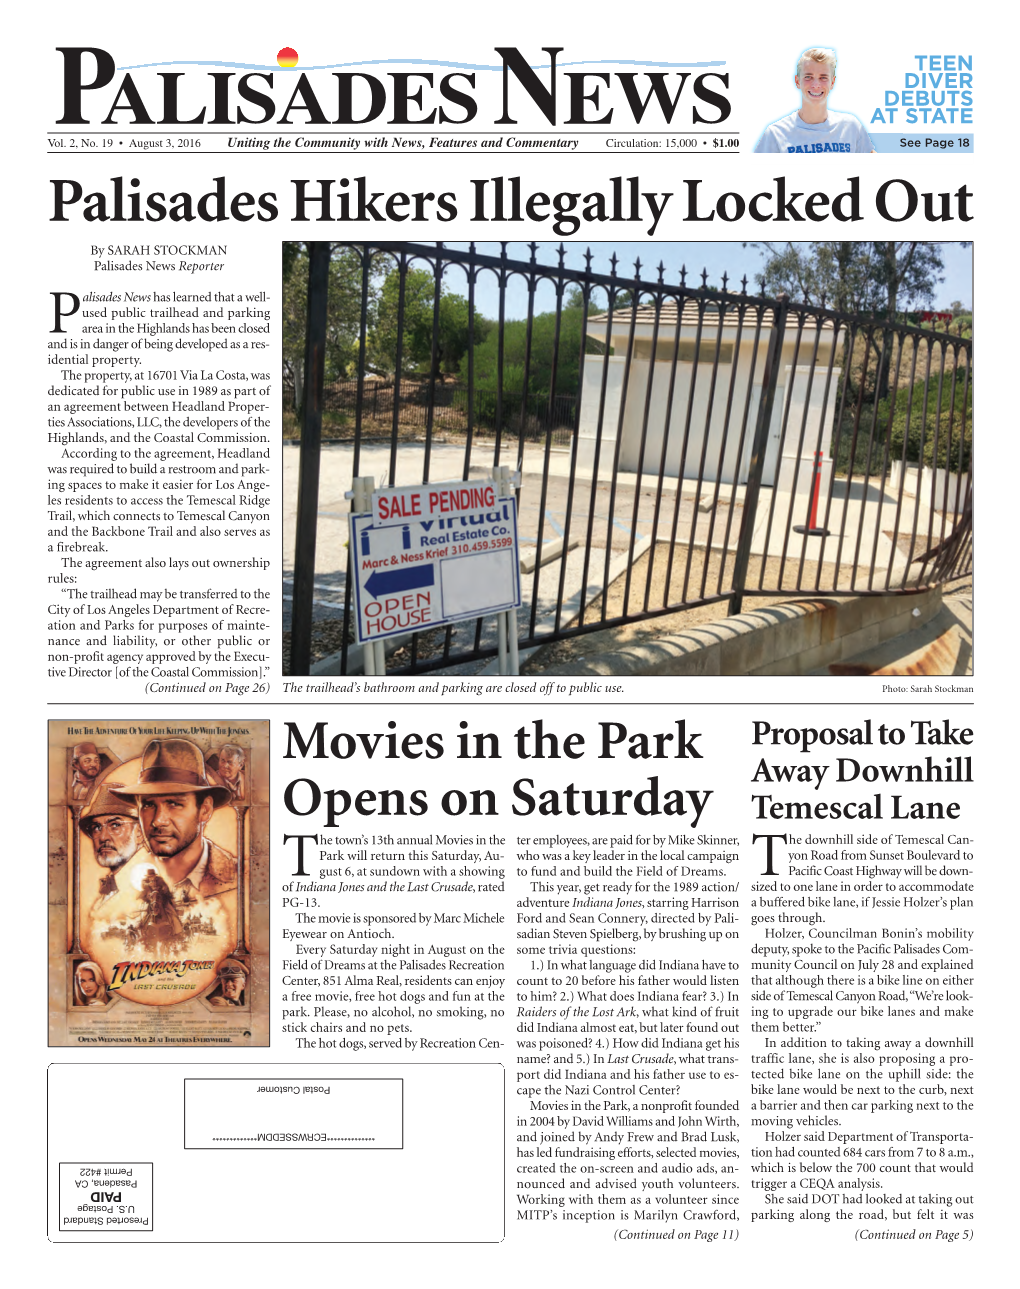 Palisades Hikers Illegally Locked out by SARAH STOCKMAN Palisades News Reporter